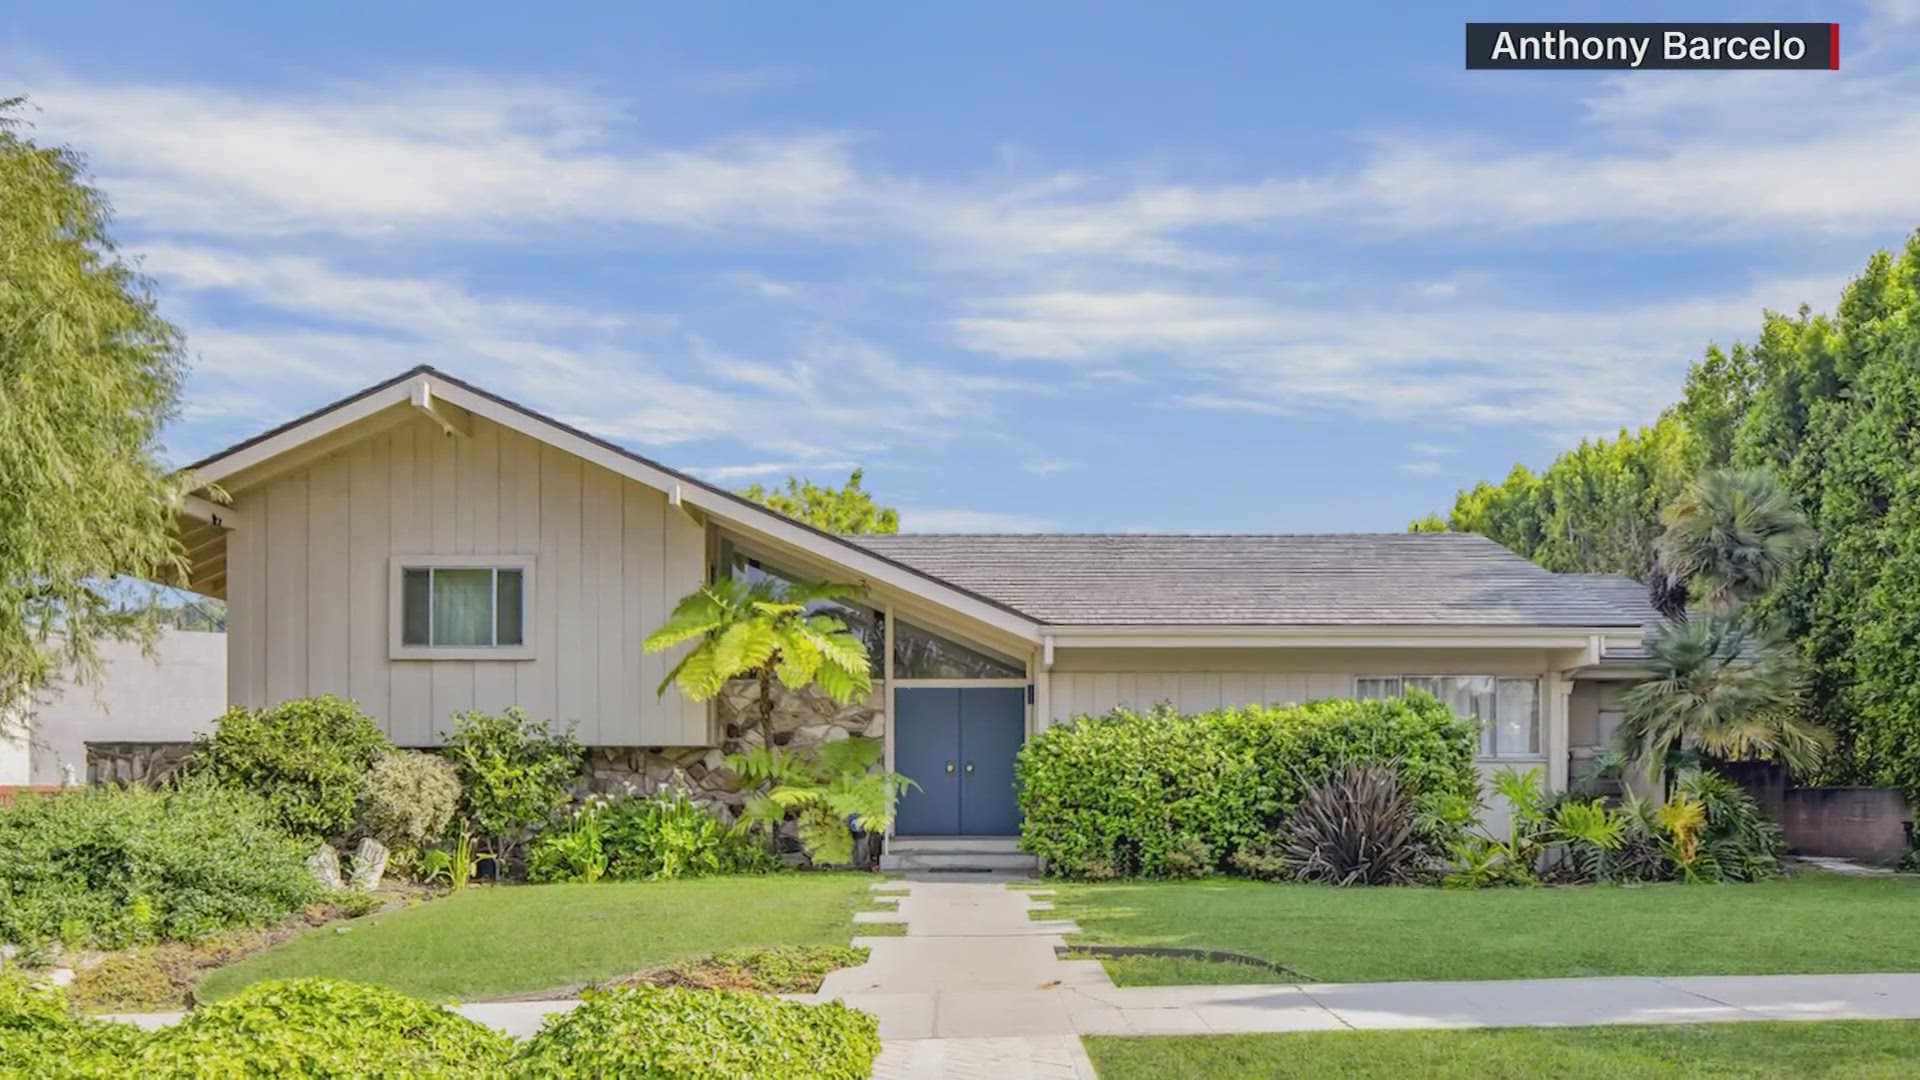 The inside of the five-bedroom, five-bathroom home was renovated by HGTV to look just like "The Brady Bunch" set.